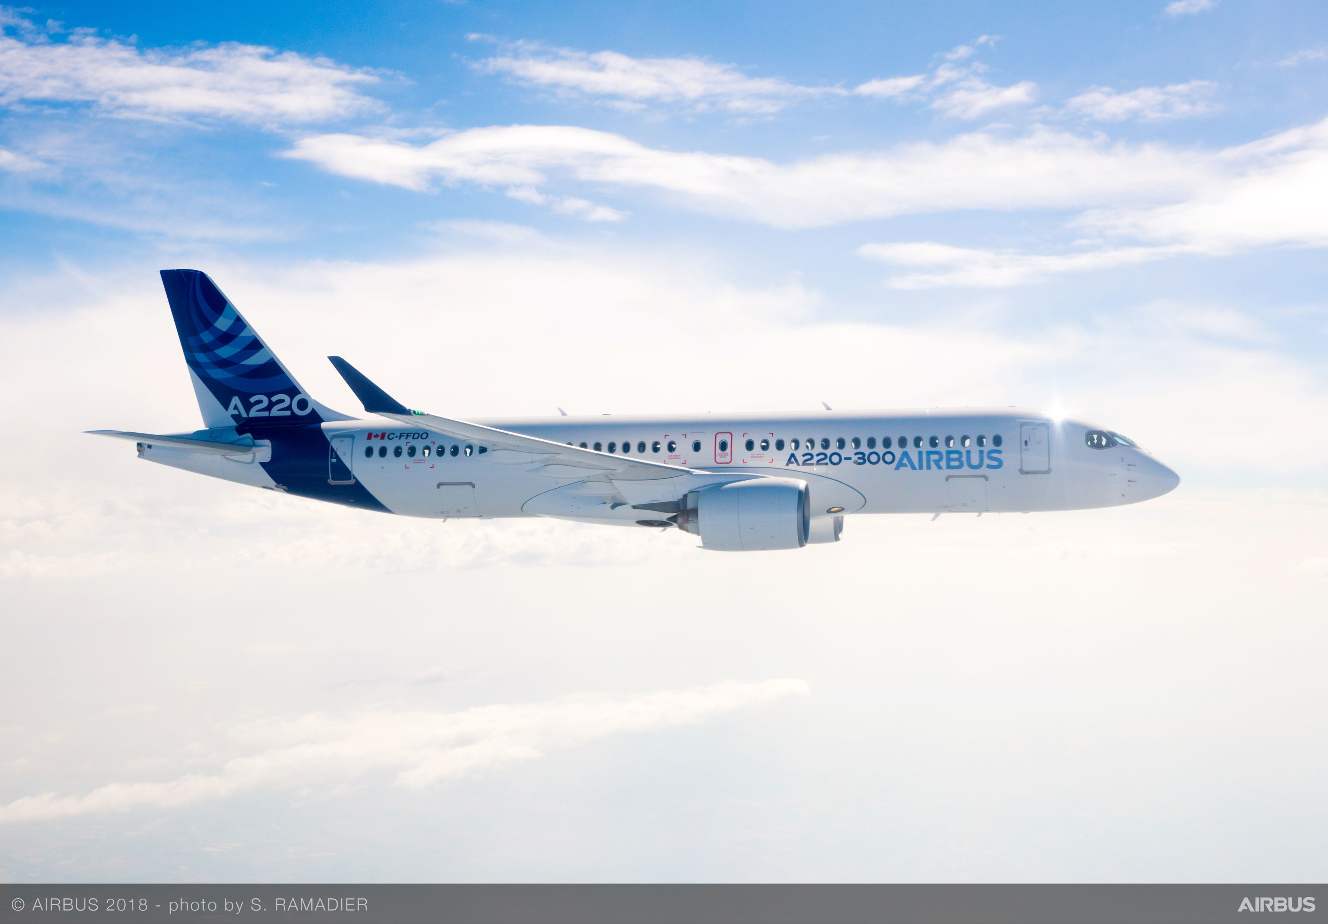 Airbus A220 wins 180-minute ETOPS approval